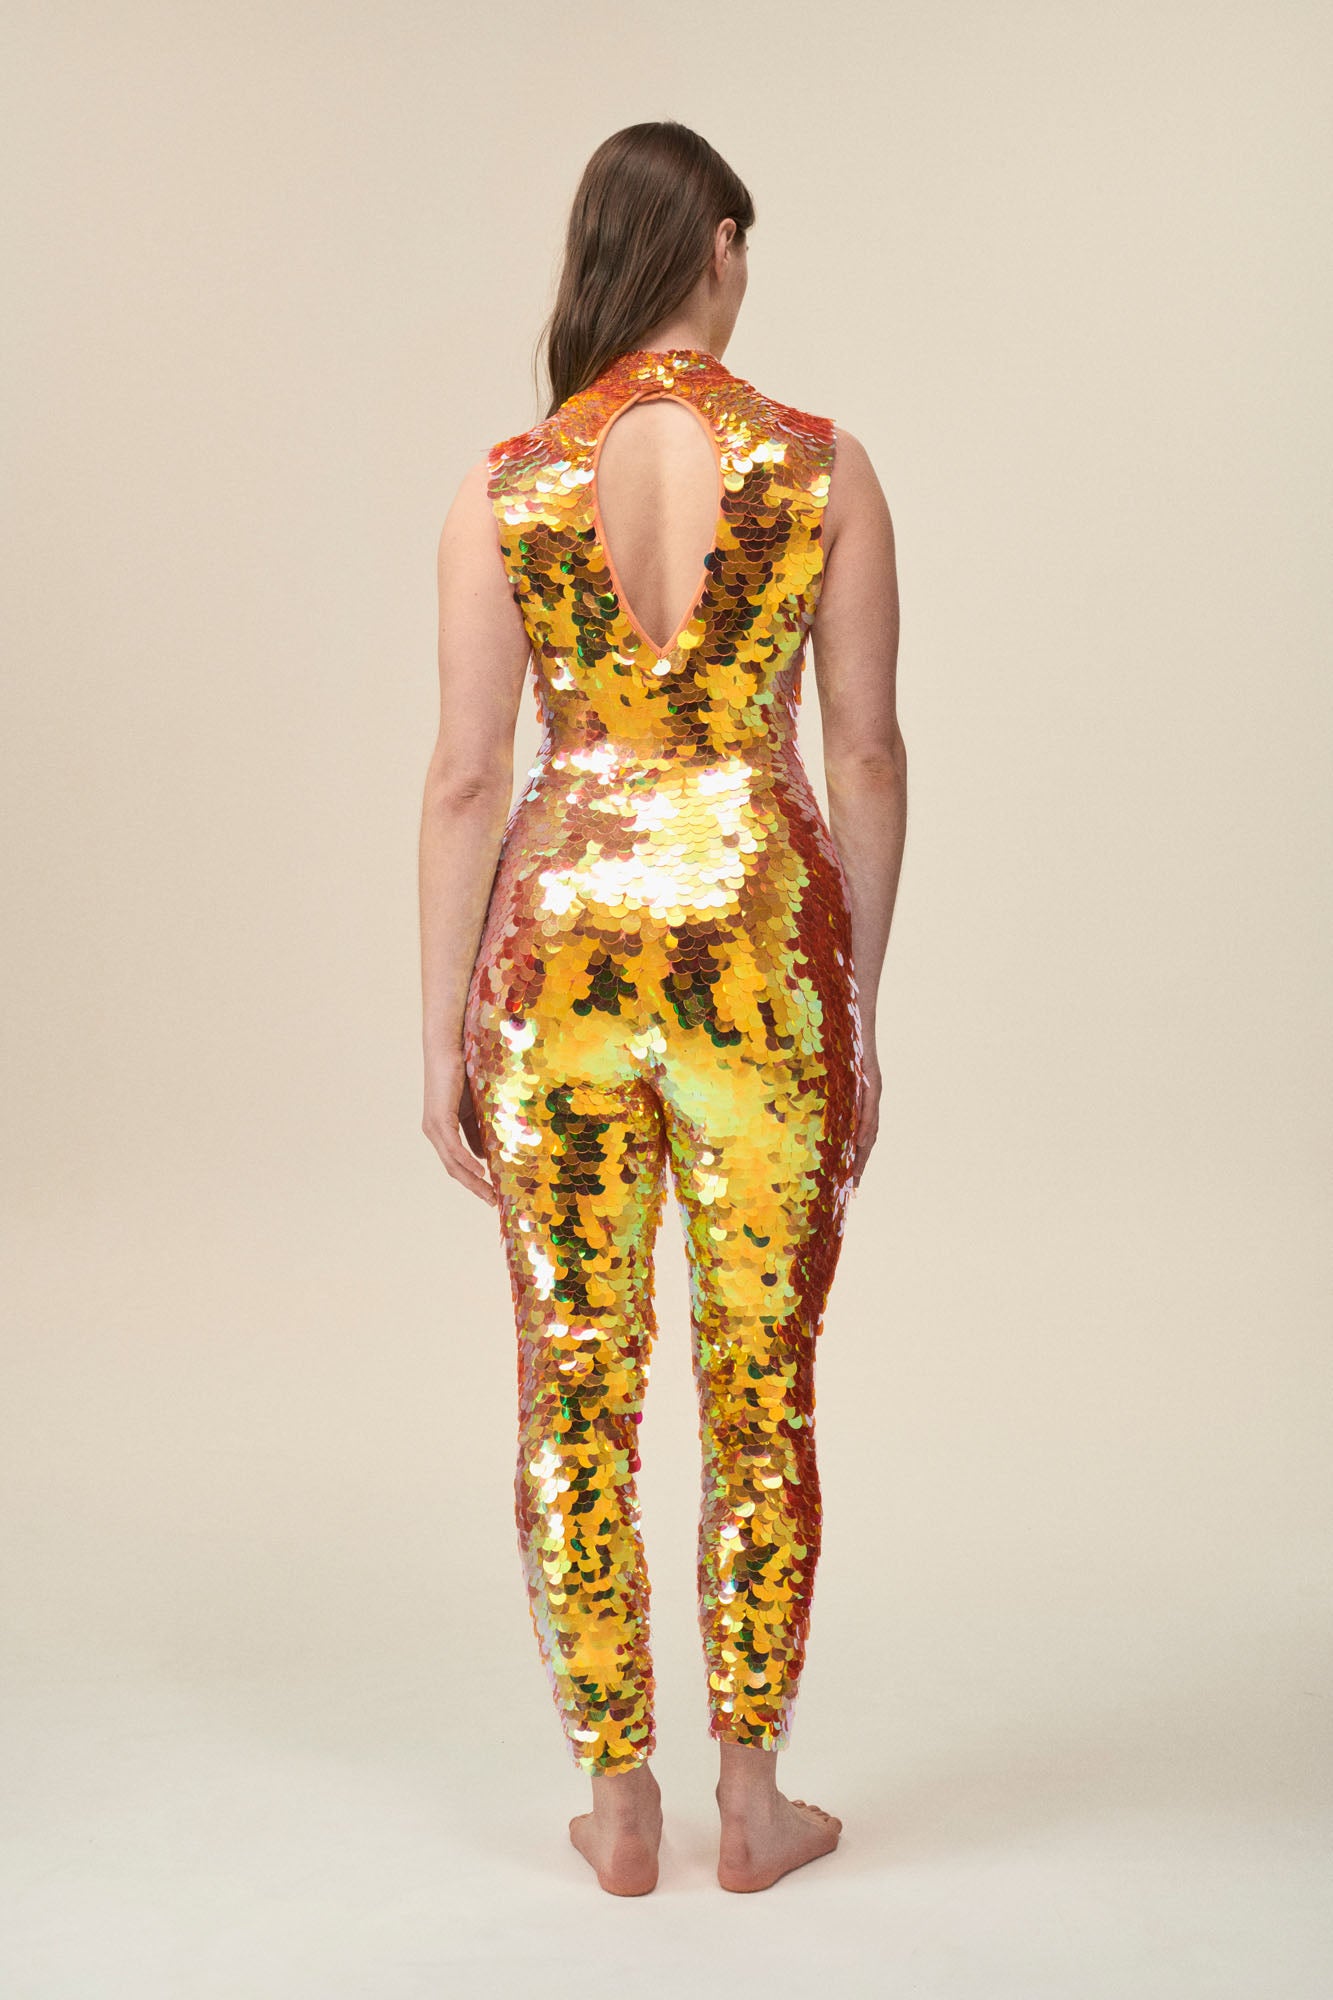 A back view of a woman wearing a high neck sequin jumpsuit covered in large round orange sequins.